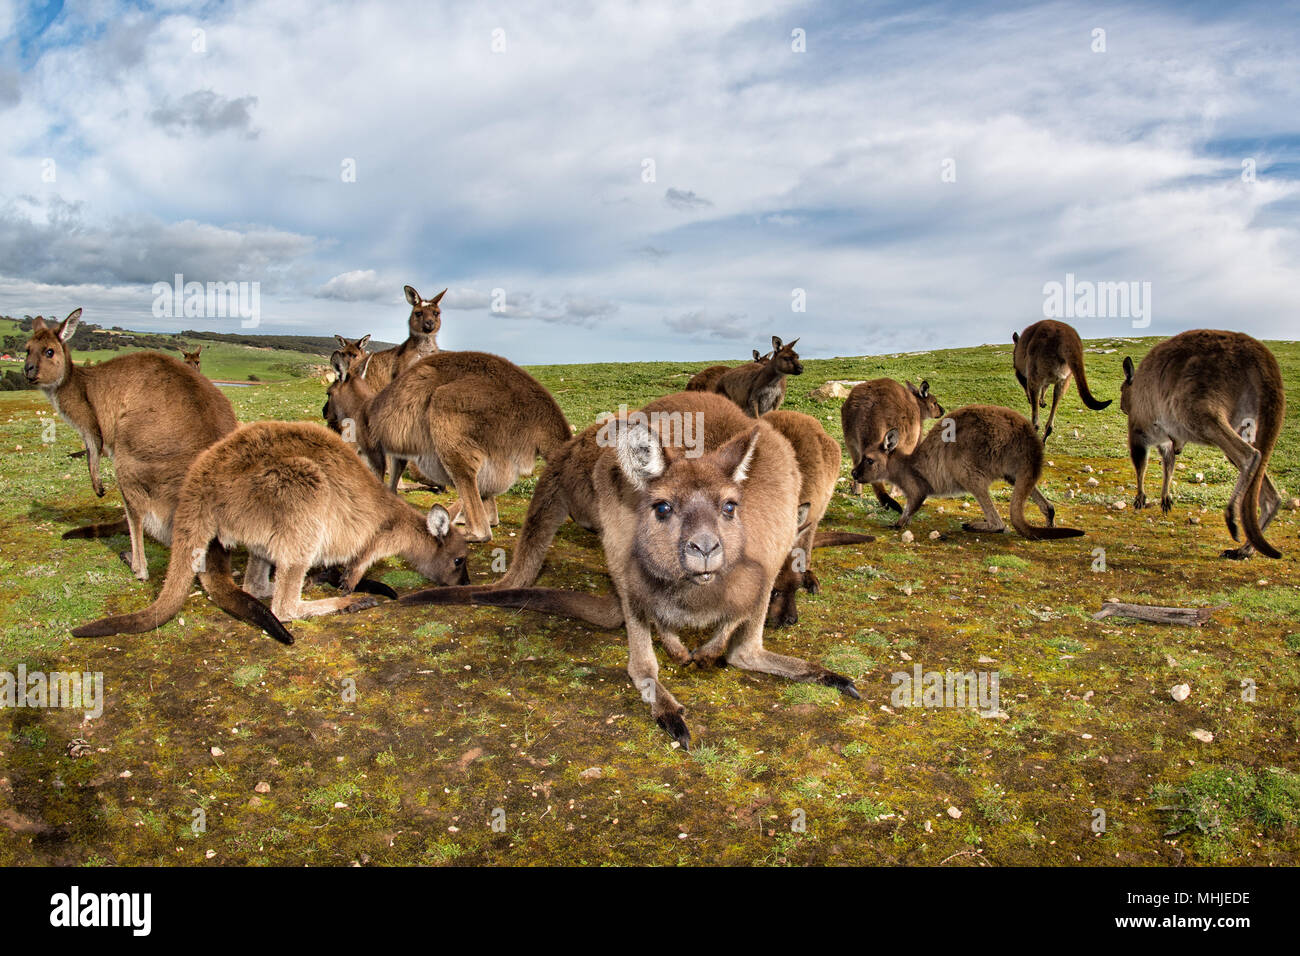 Kangaroos family while looking at in kangaroo island stokes bay on cloudy sky background Stock Photo